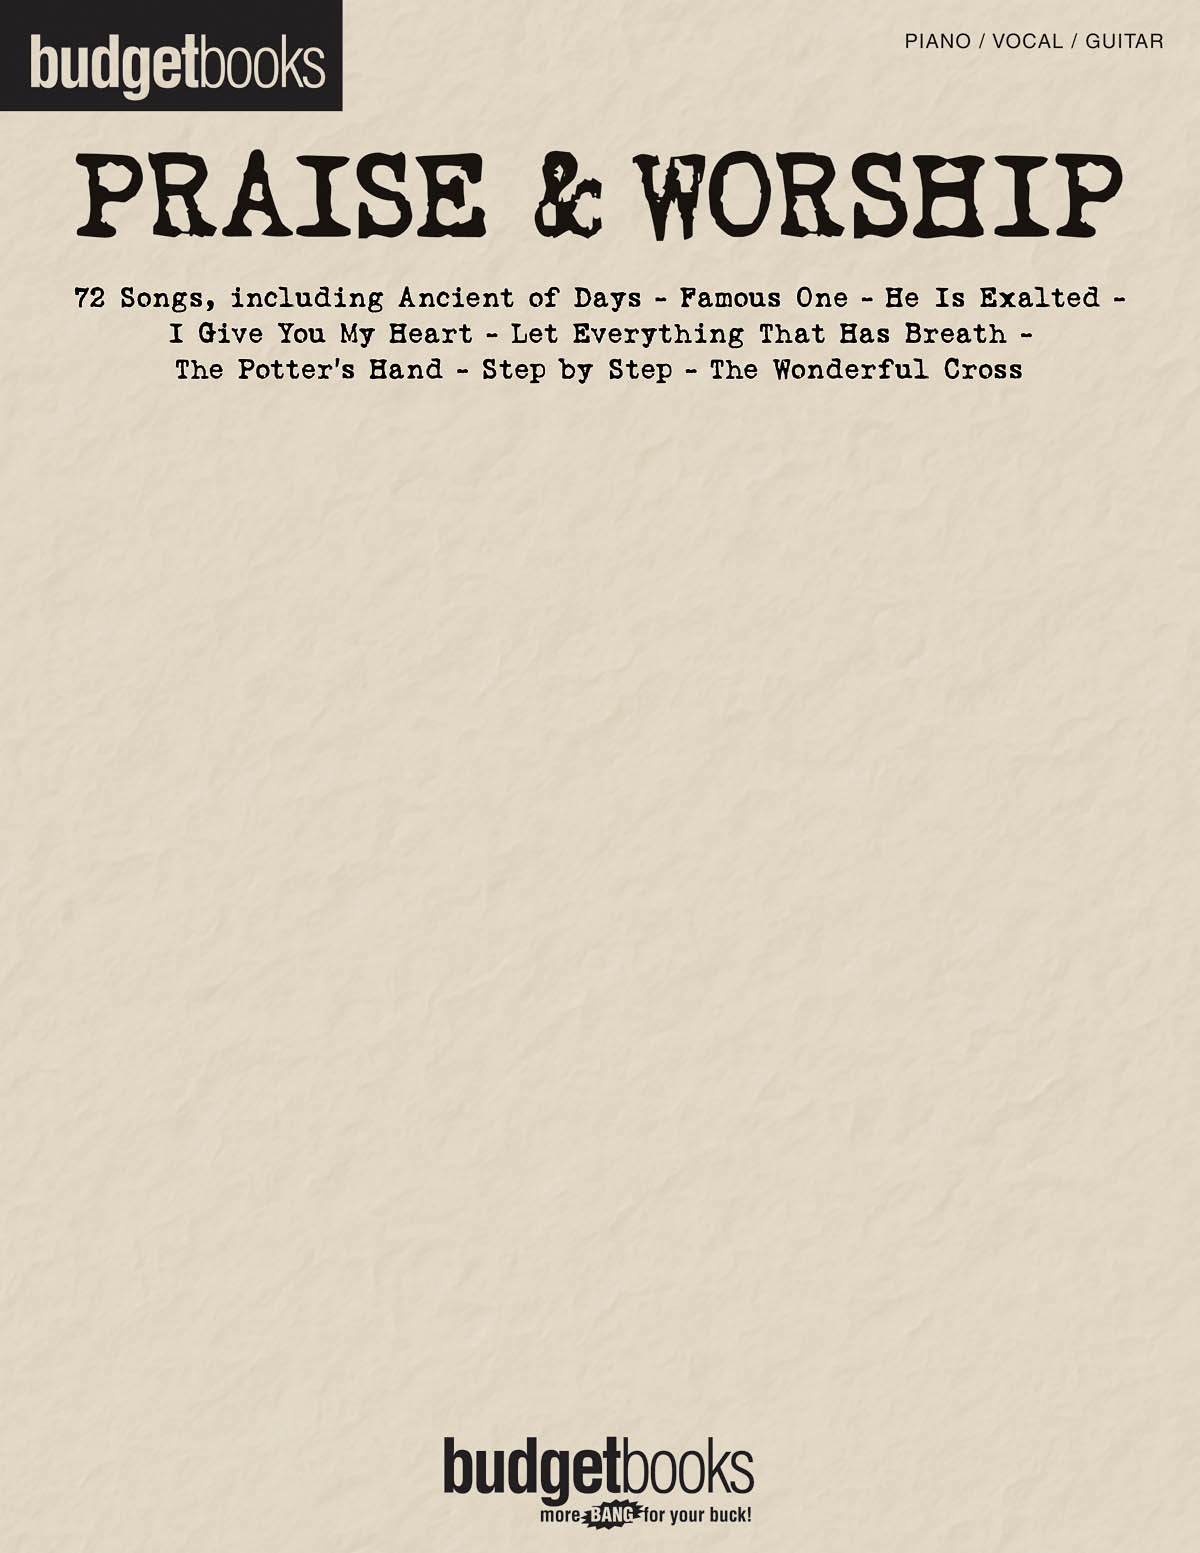 Budgetbooks: Praise & Worship pro Piano, Vocal and Guitar